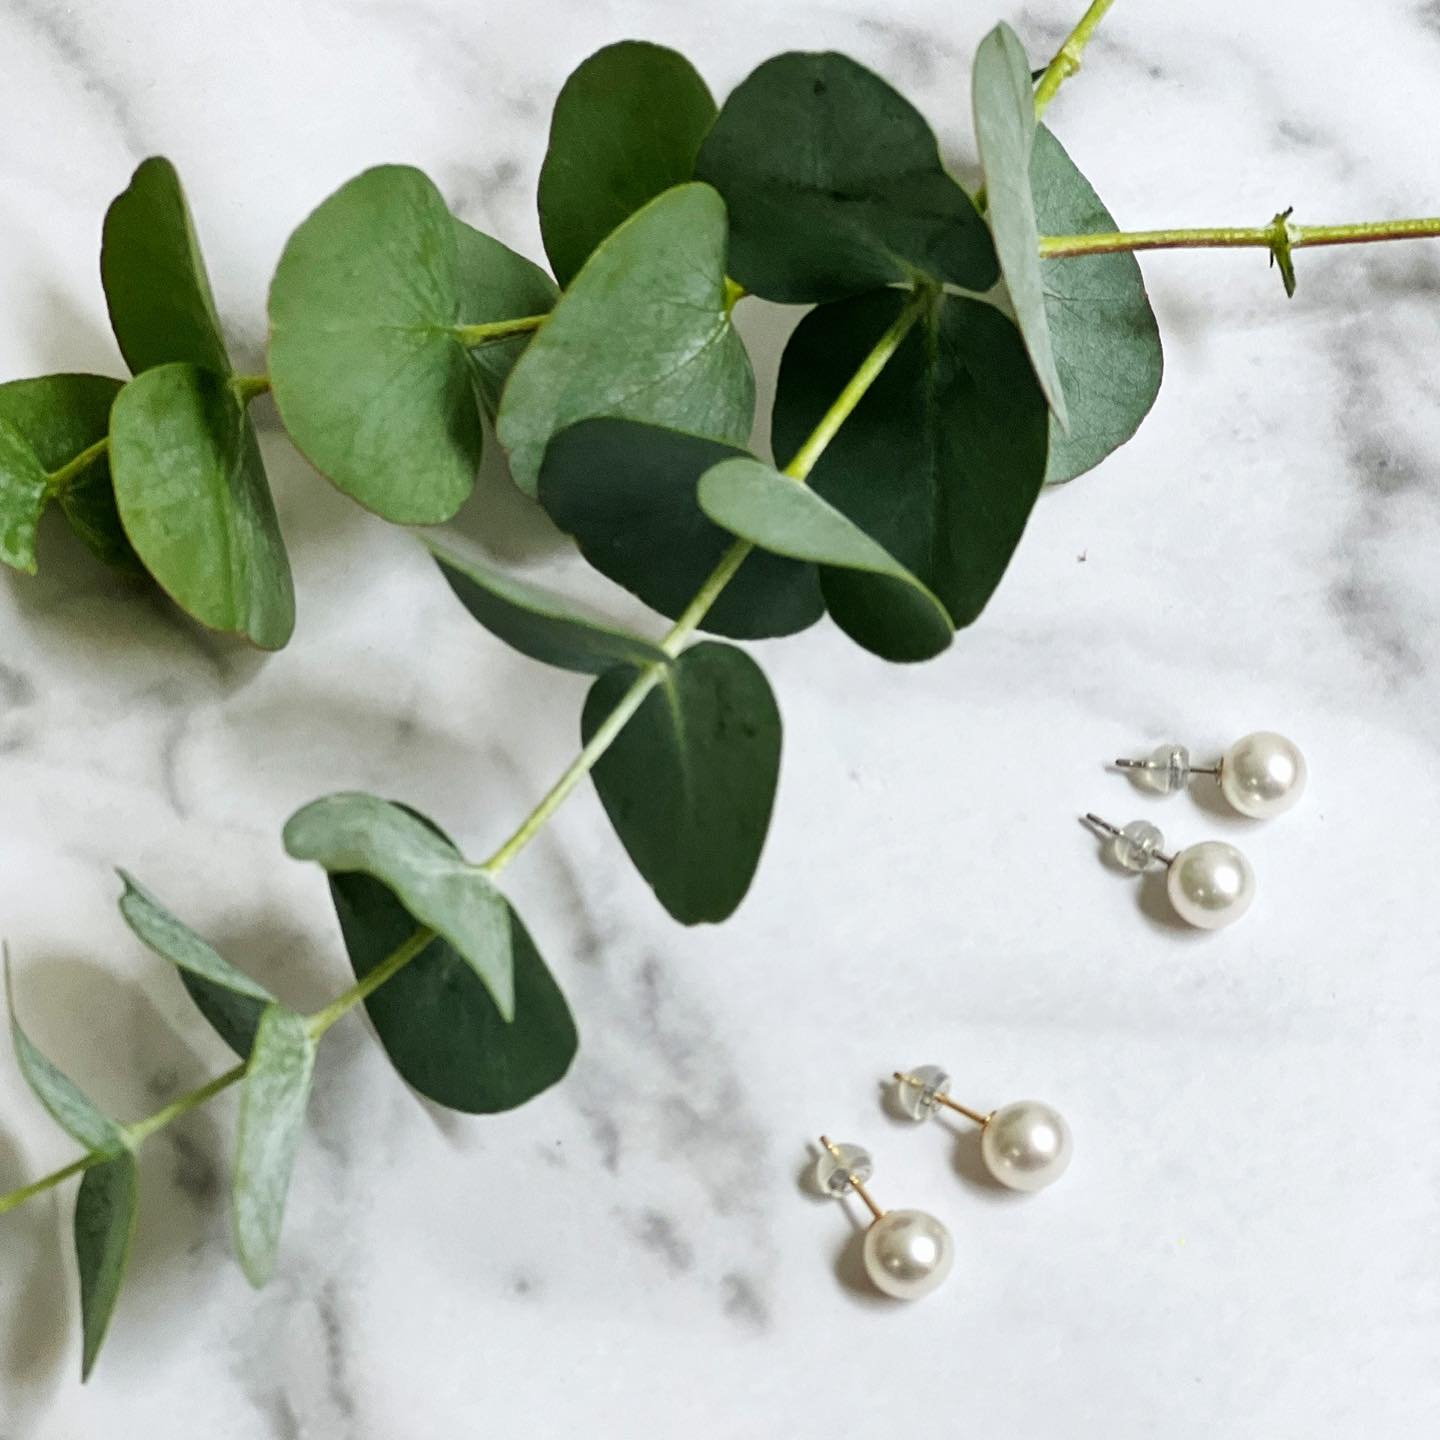 Closeup of Akoya Classic Earrings on marble background with some leaves